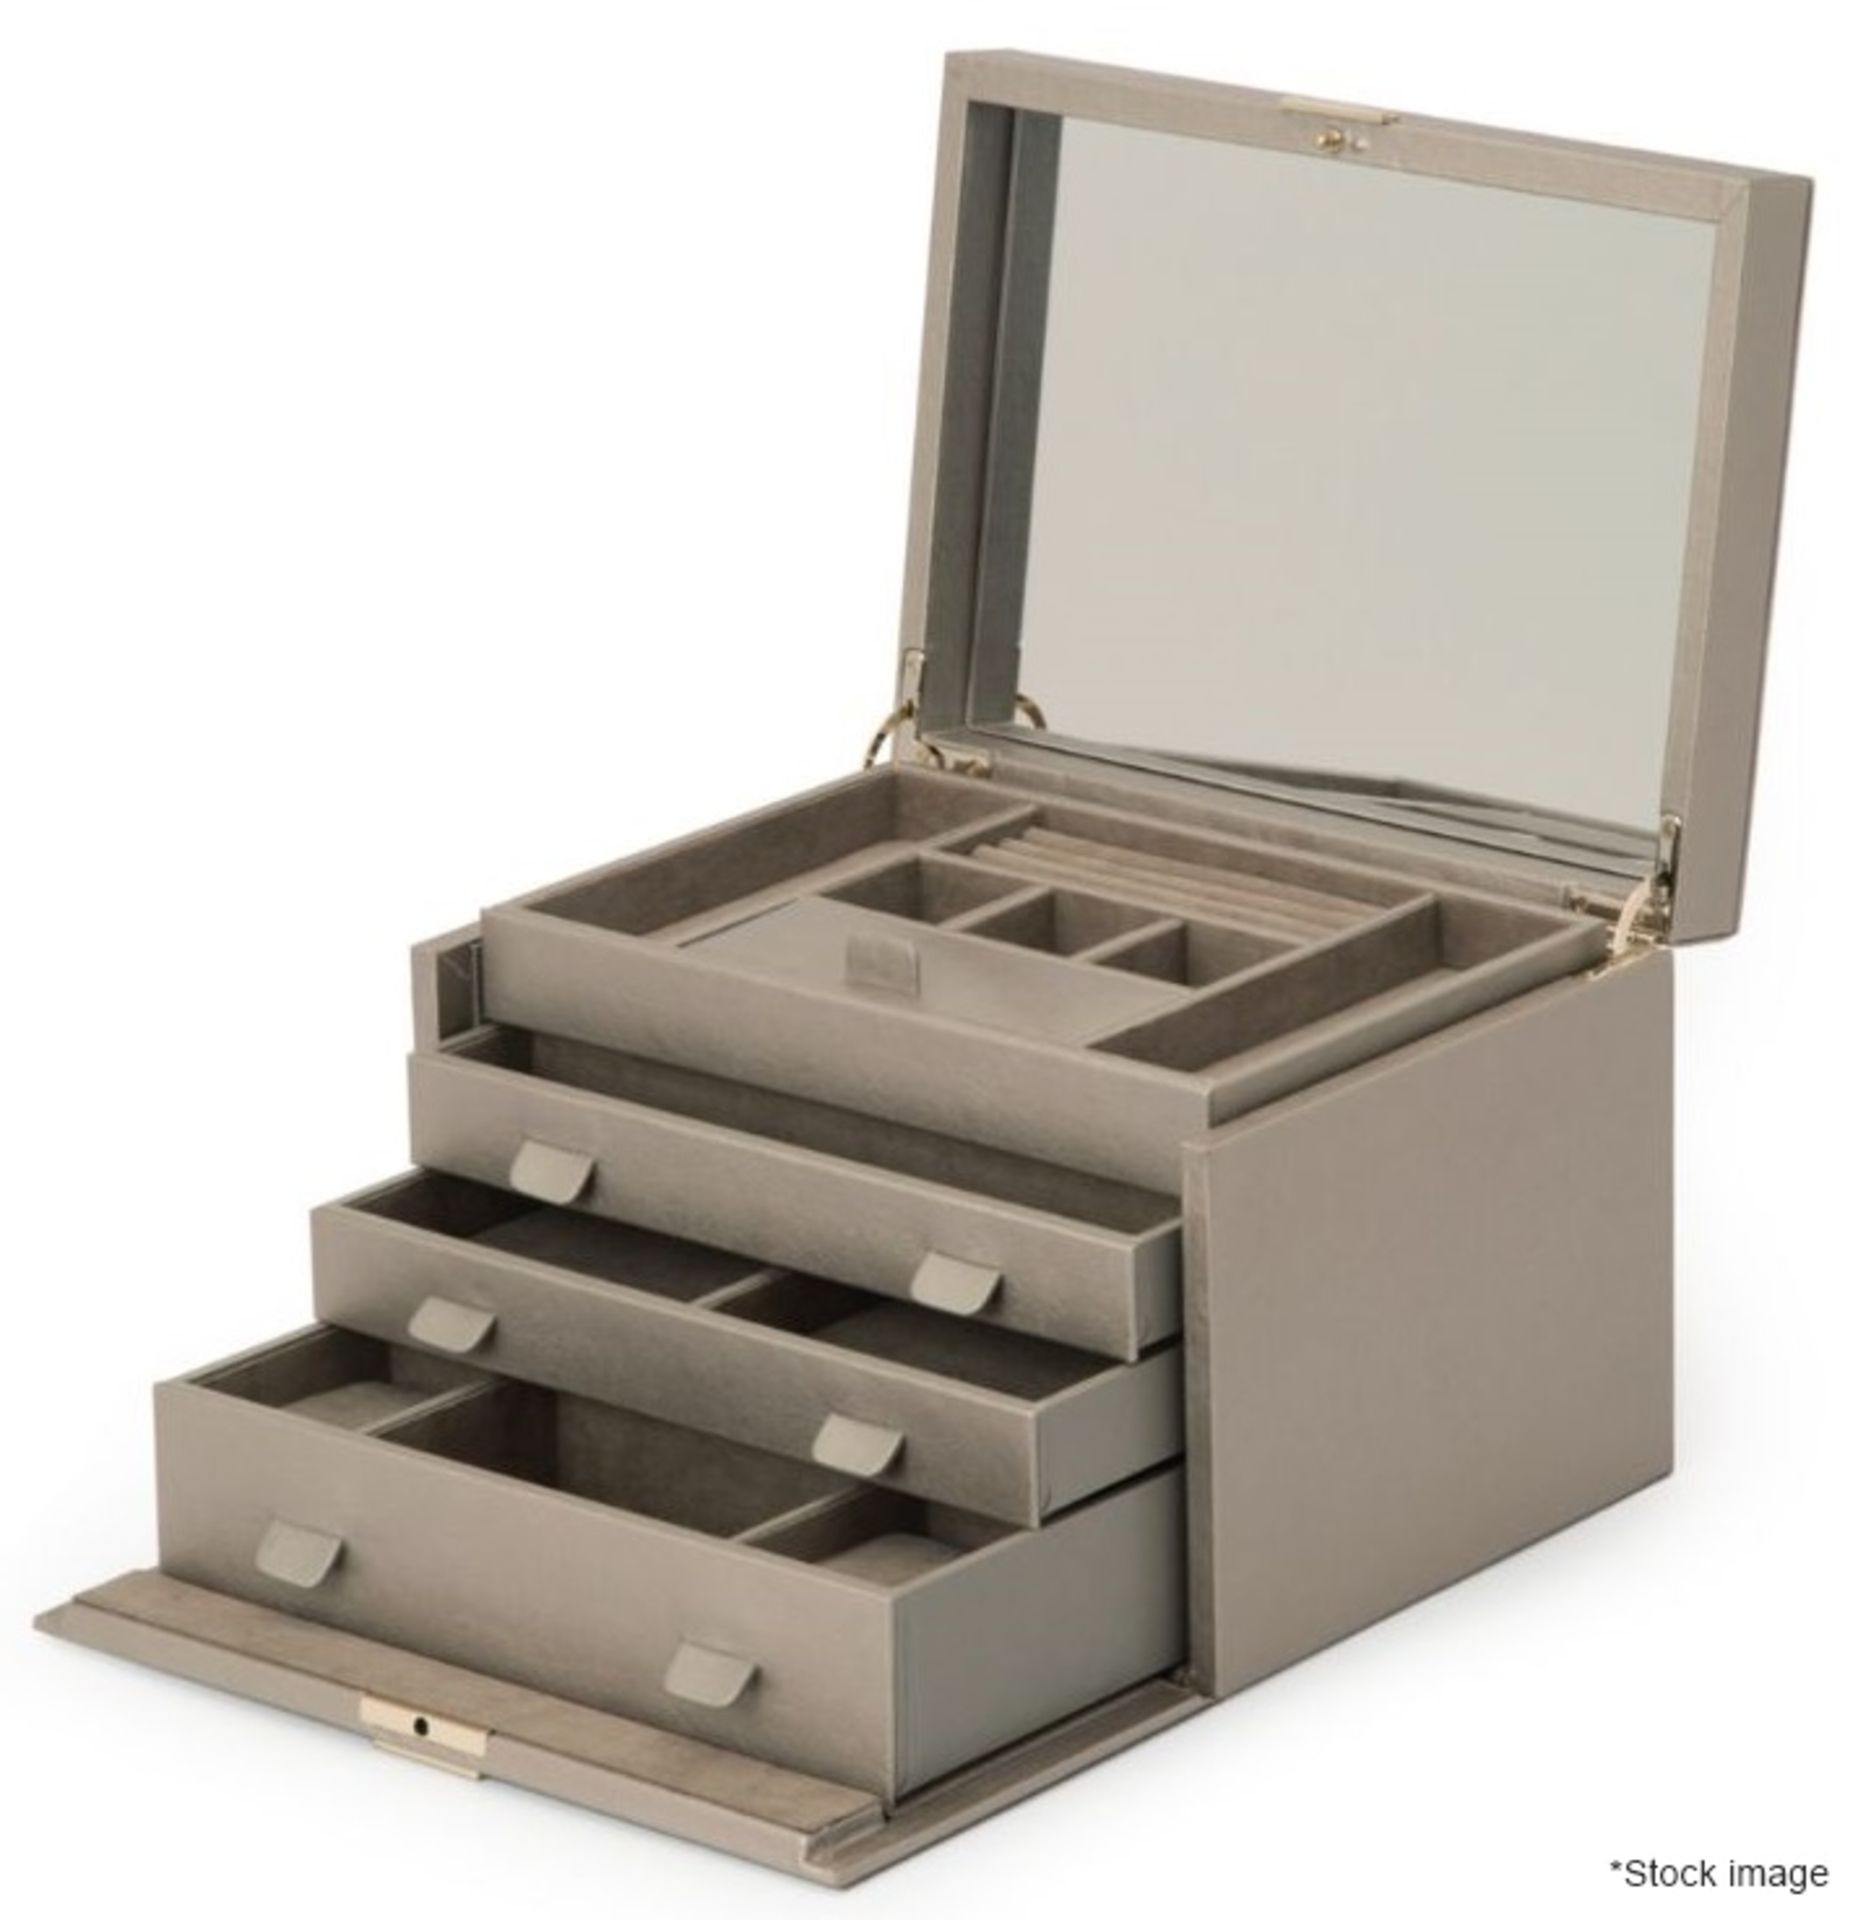 1 x WOLF 'Palermo' Large Luxury Leather Jewellery Box, With A Pewter Finish - Original Price £475.00